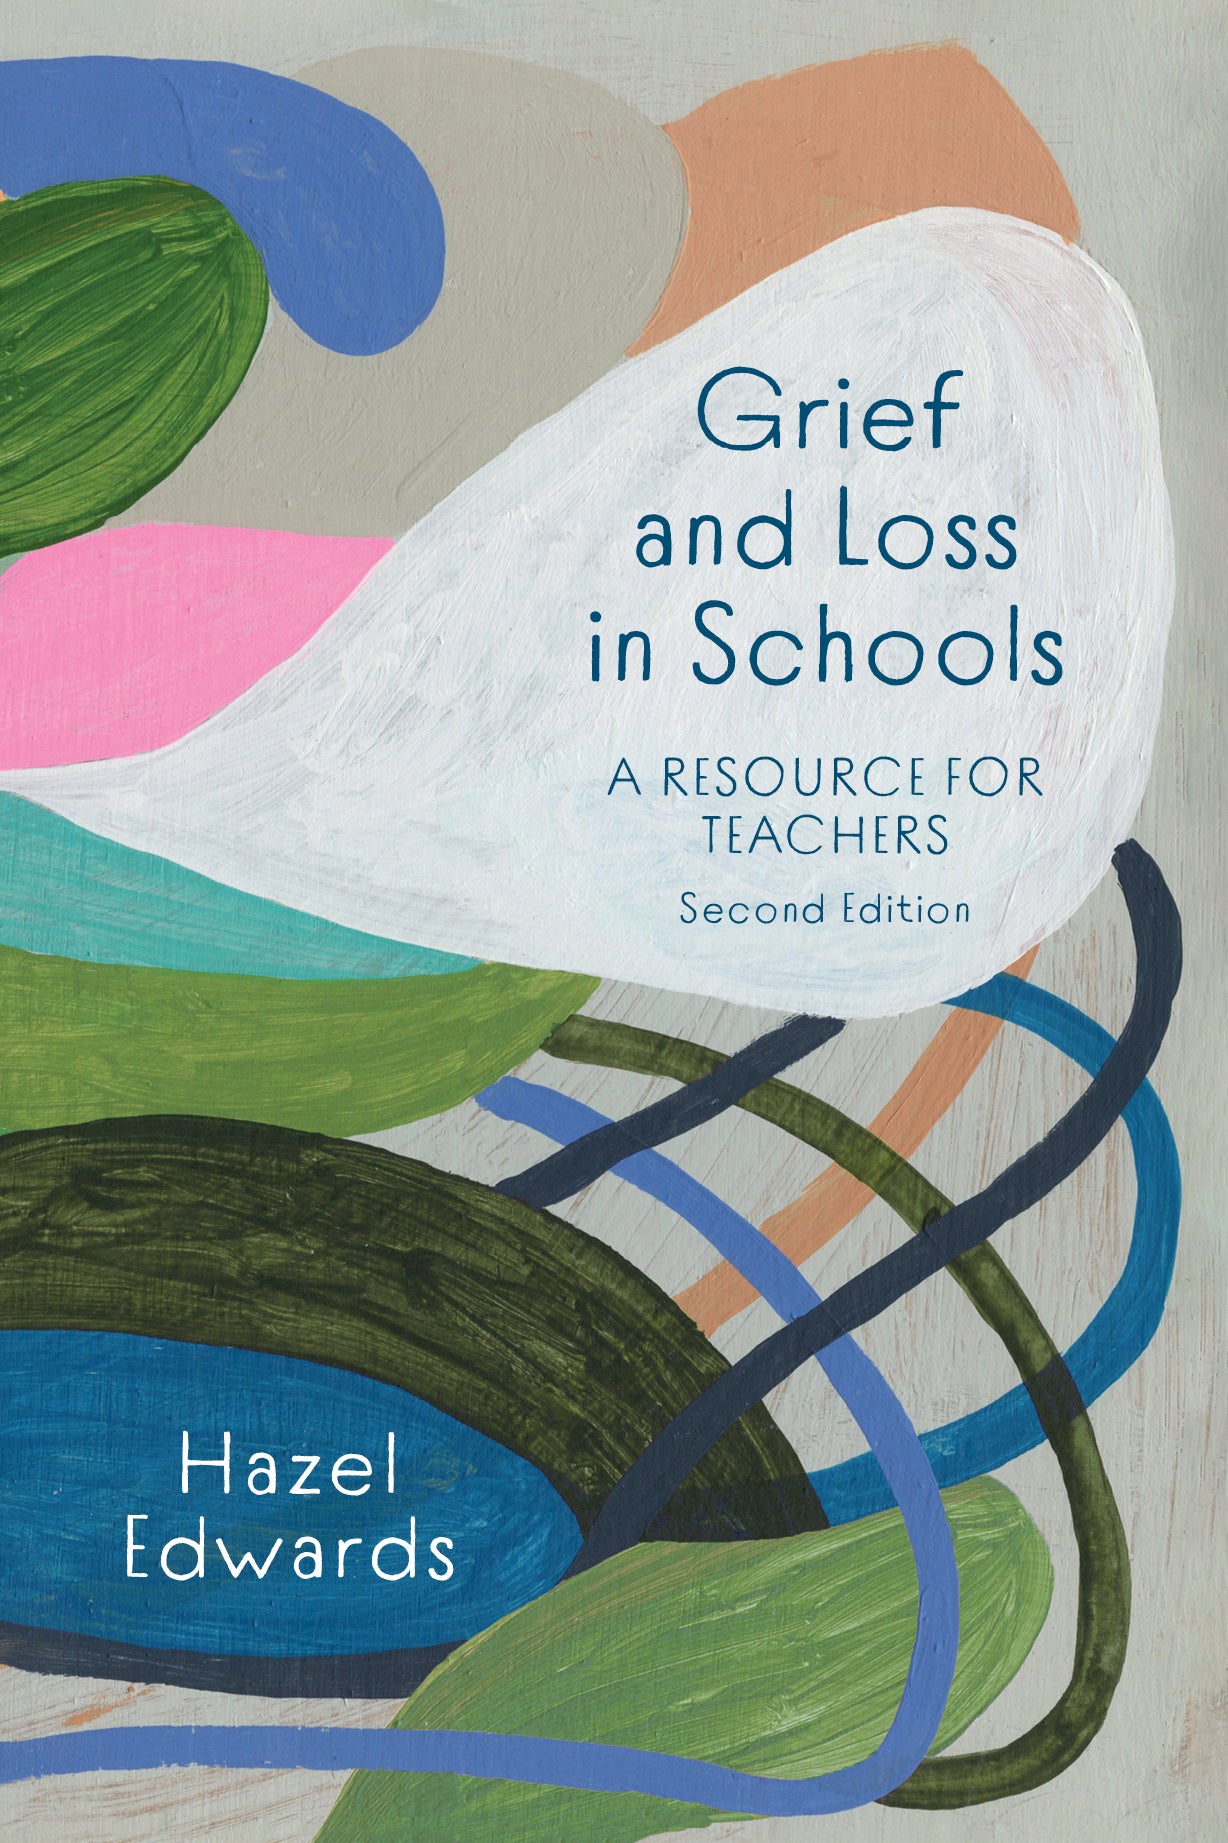 Grief and Loss in Schools